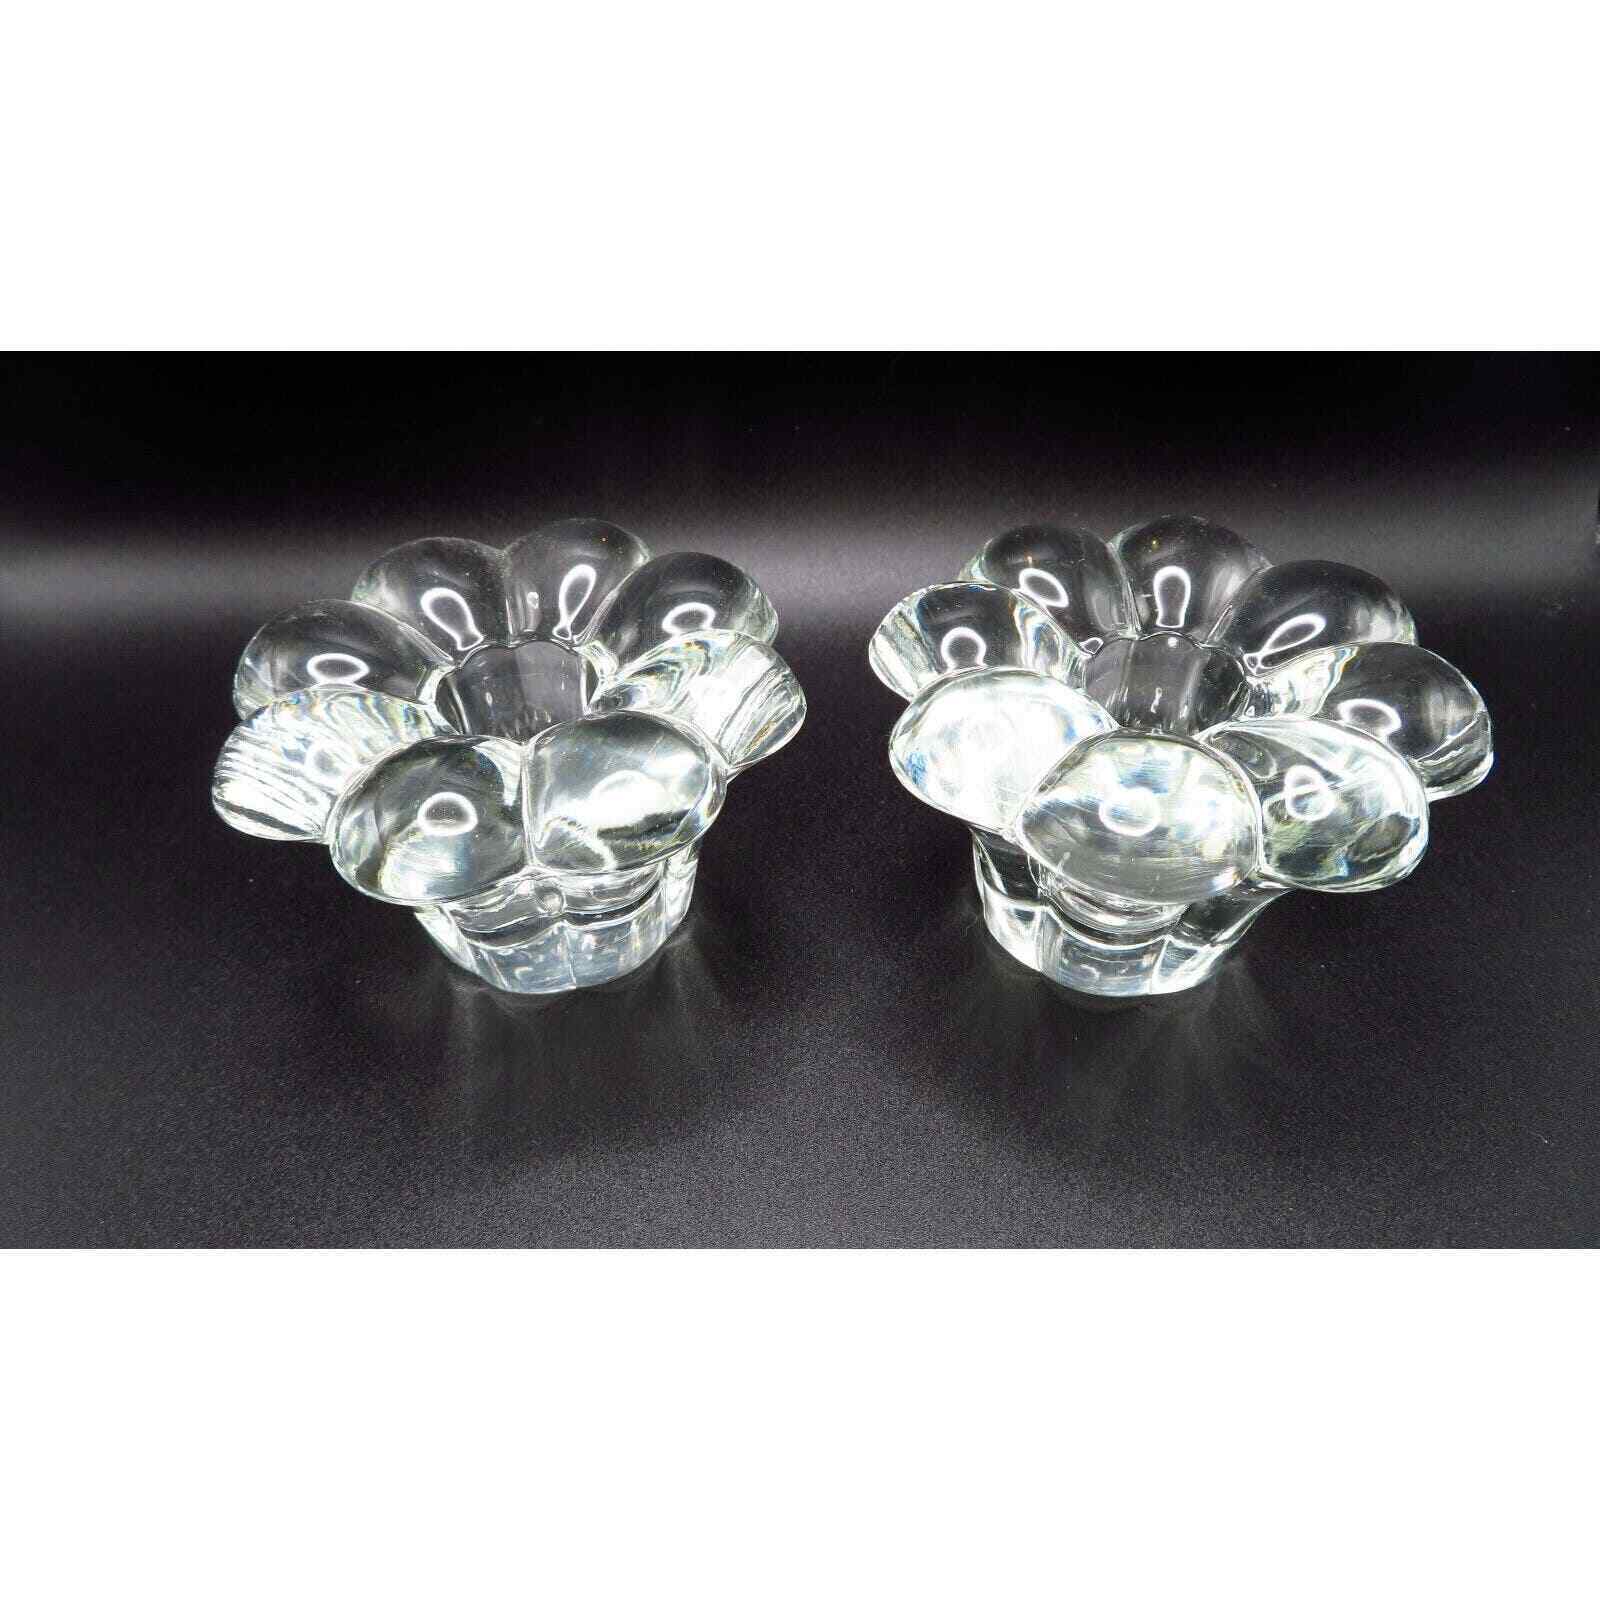 Vintage 1950s Pair of Heisey Crystolite Round Flower Candlestick Holders